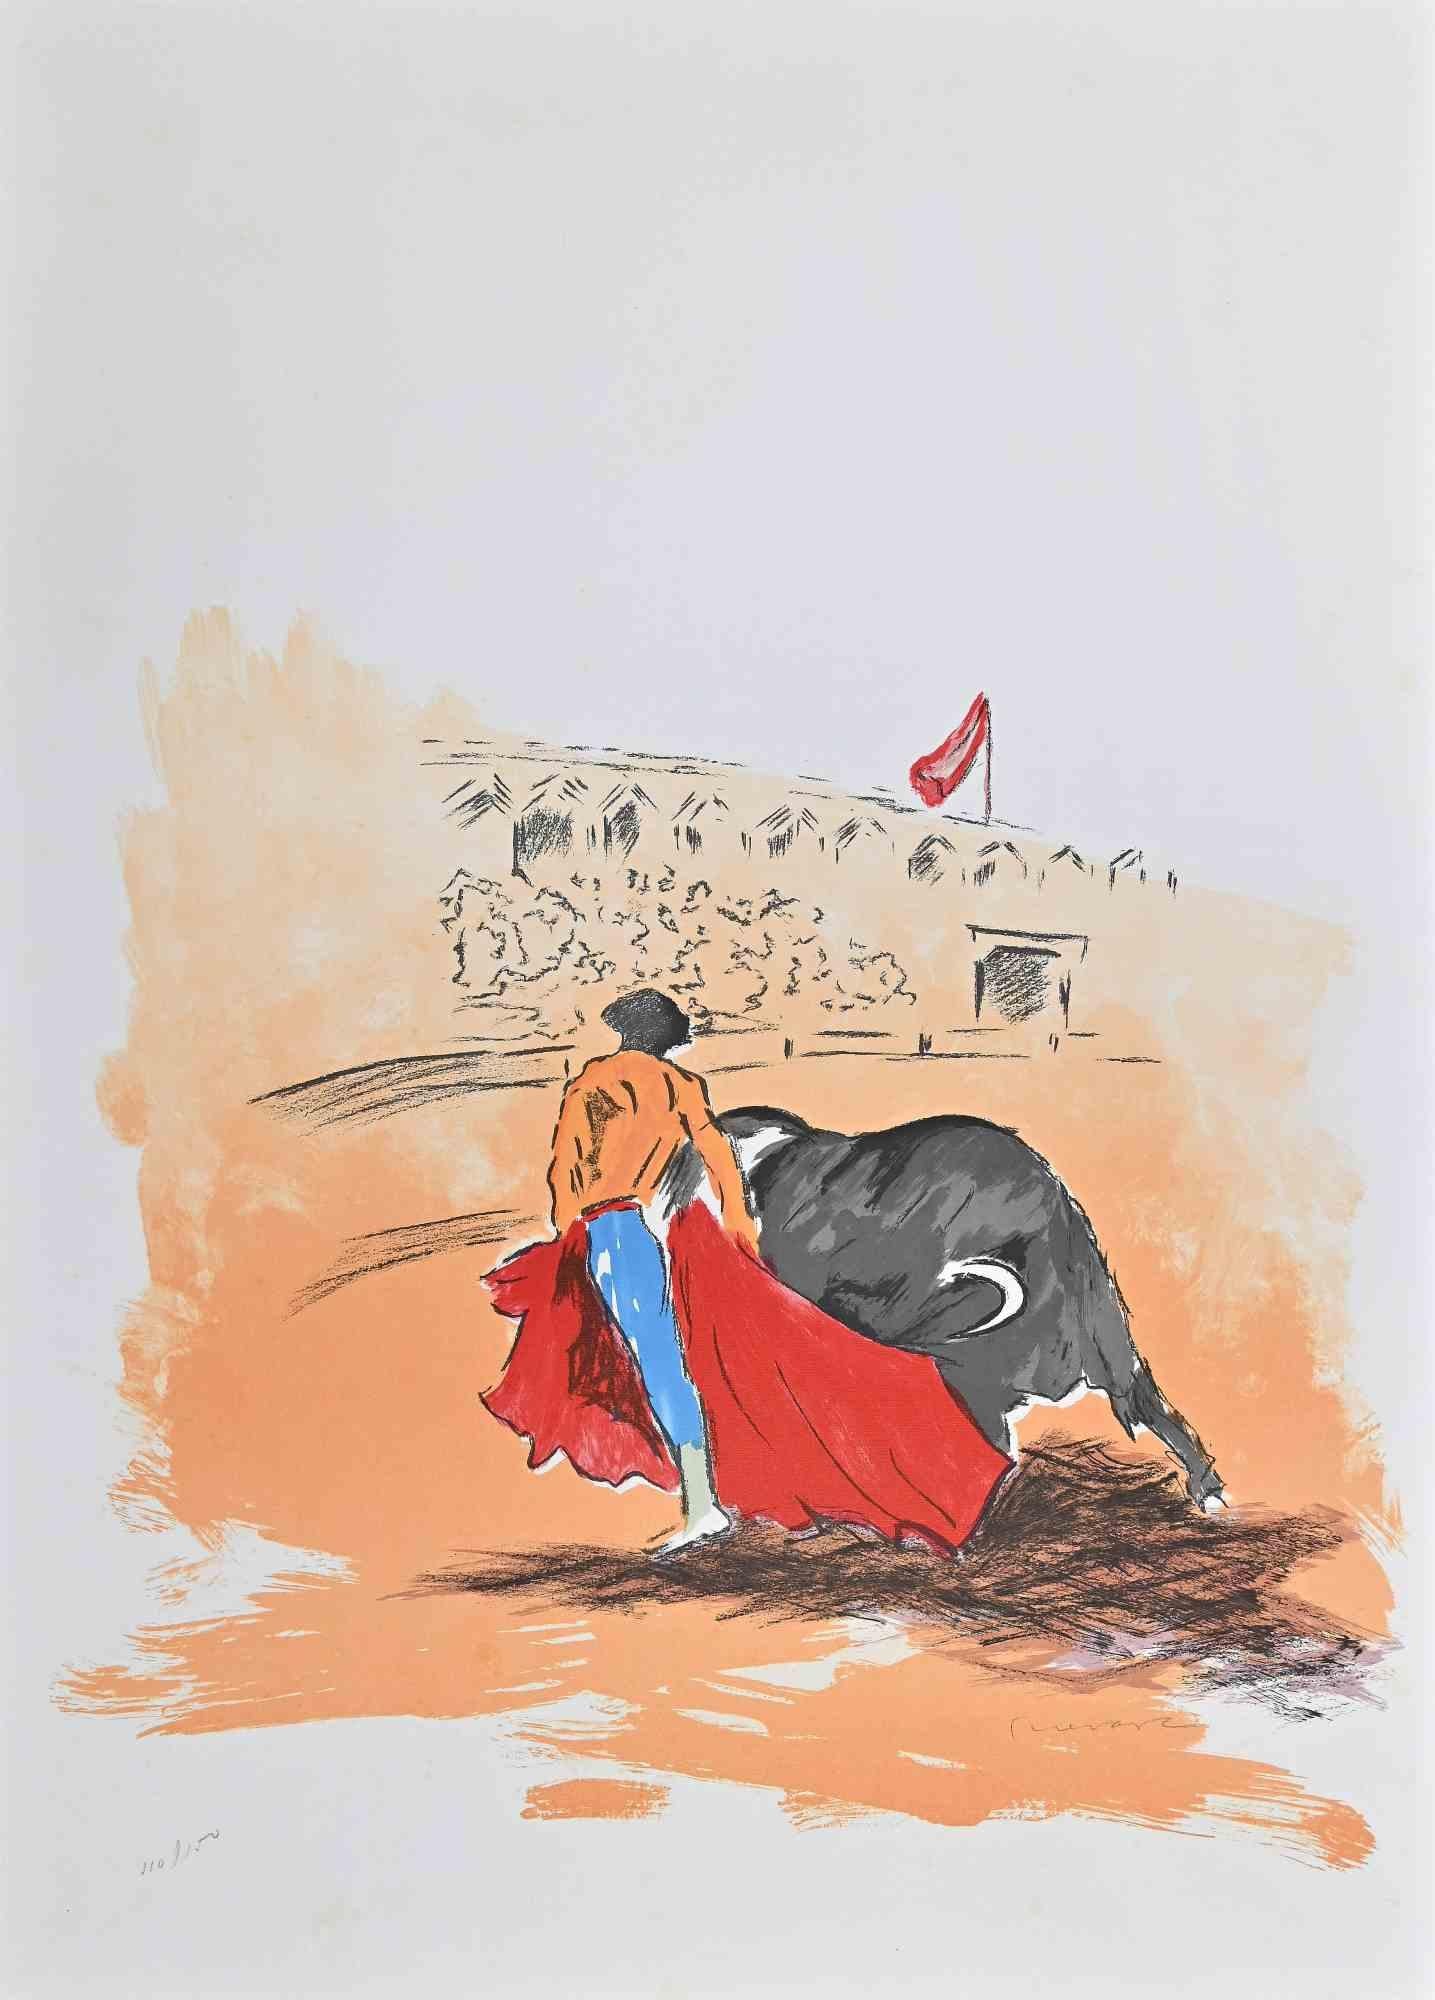 Bullfight is an original artwork realized by Josè Guevara in the 1971. 

Colored lithograph on paper. Edited by Fondazione Di Paolo.

Hand-signed in pencil on the lower left. Numbered on the lower right.Limited edition of 150 copies.

Good